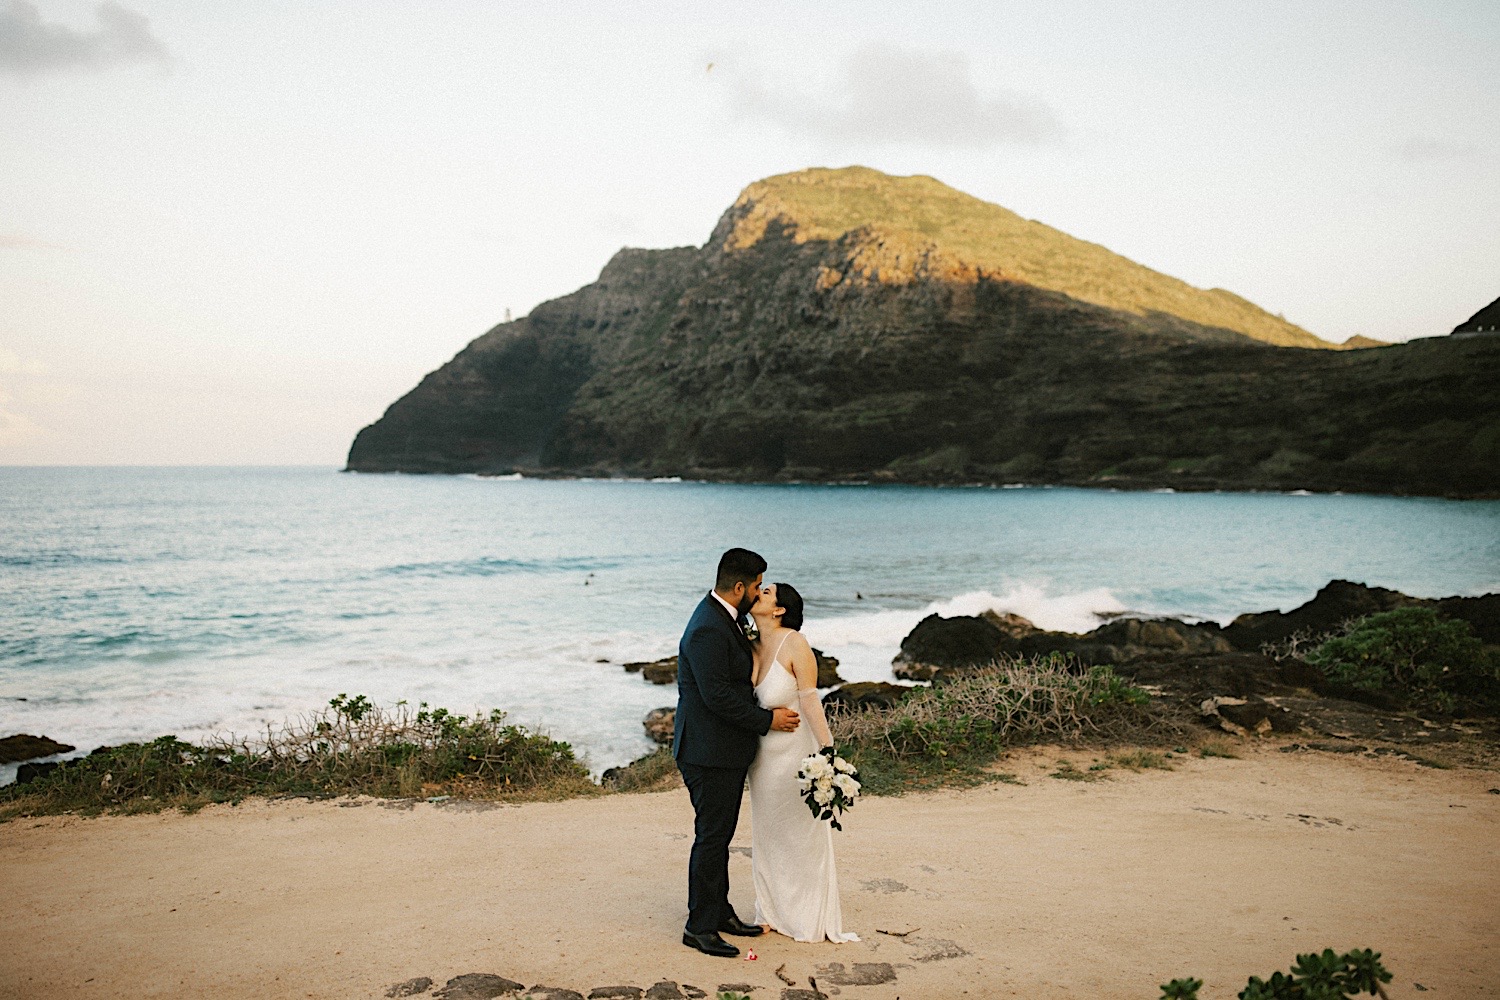 A bride and groom kiss while on Makapuu Beach in Hawaii after their elopement ceremony. The ocean and a mountain are behind them.